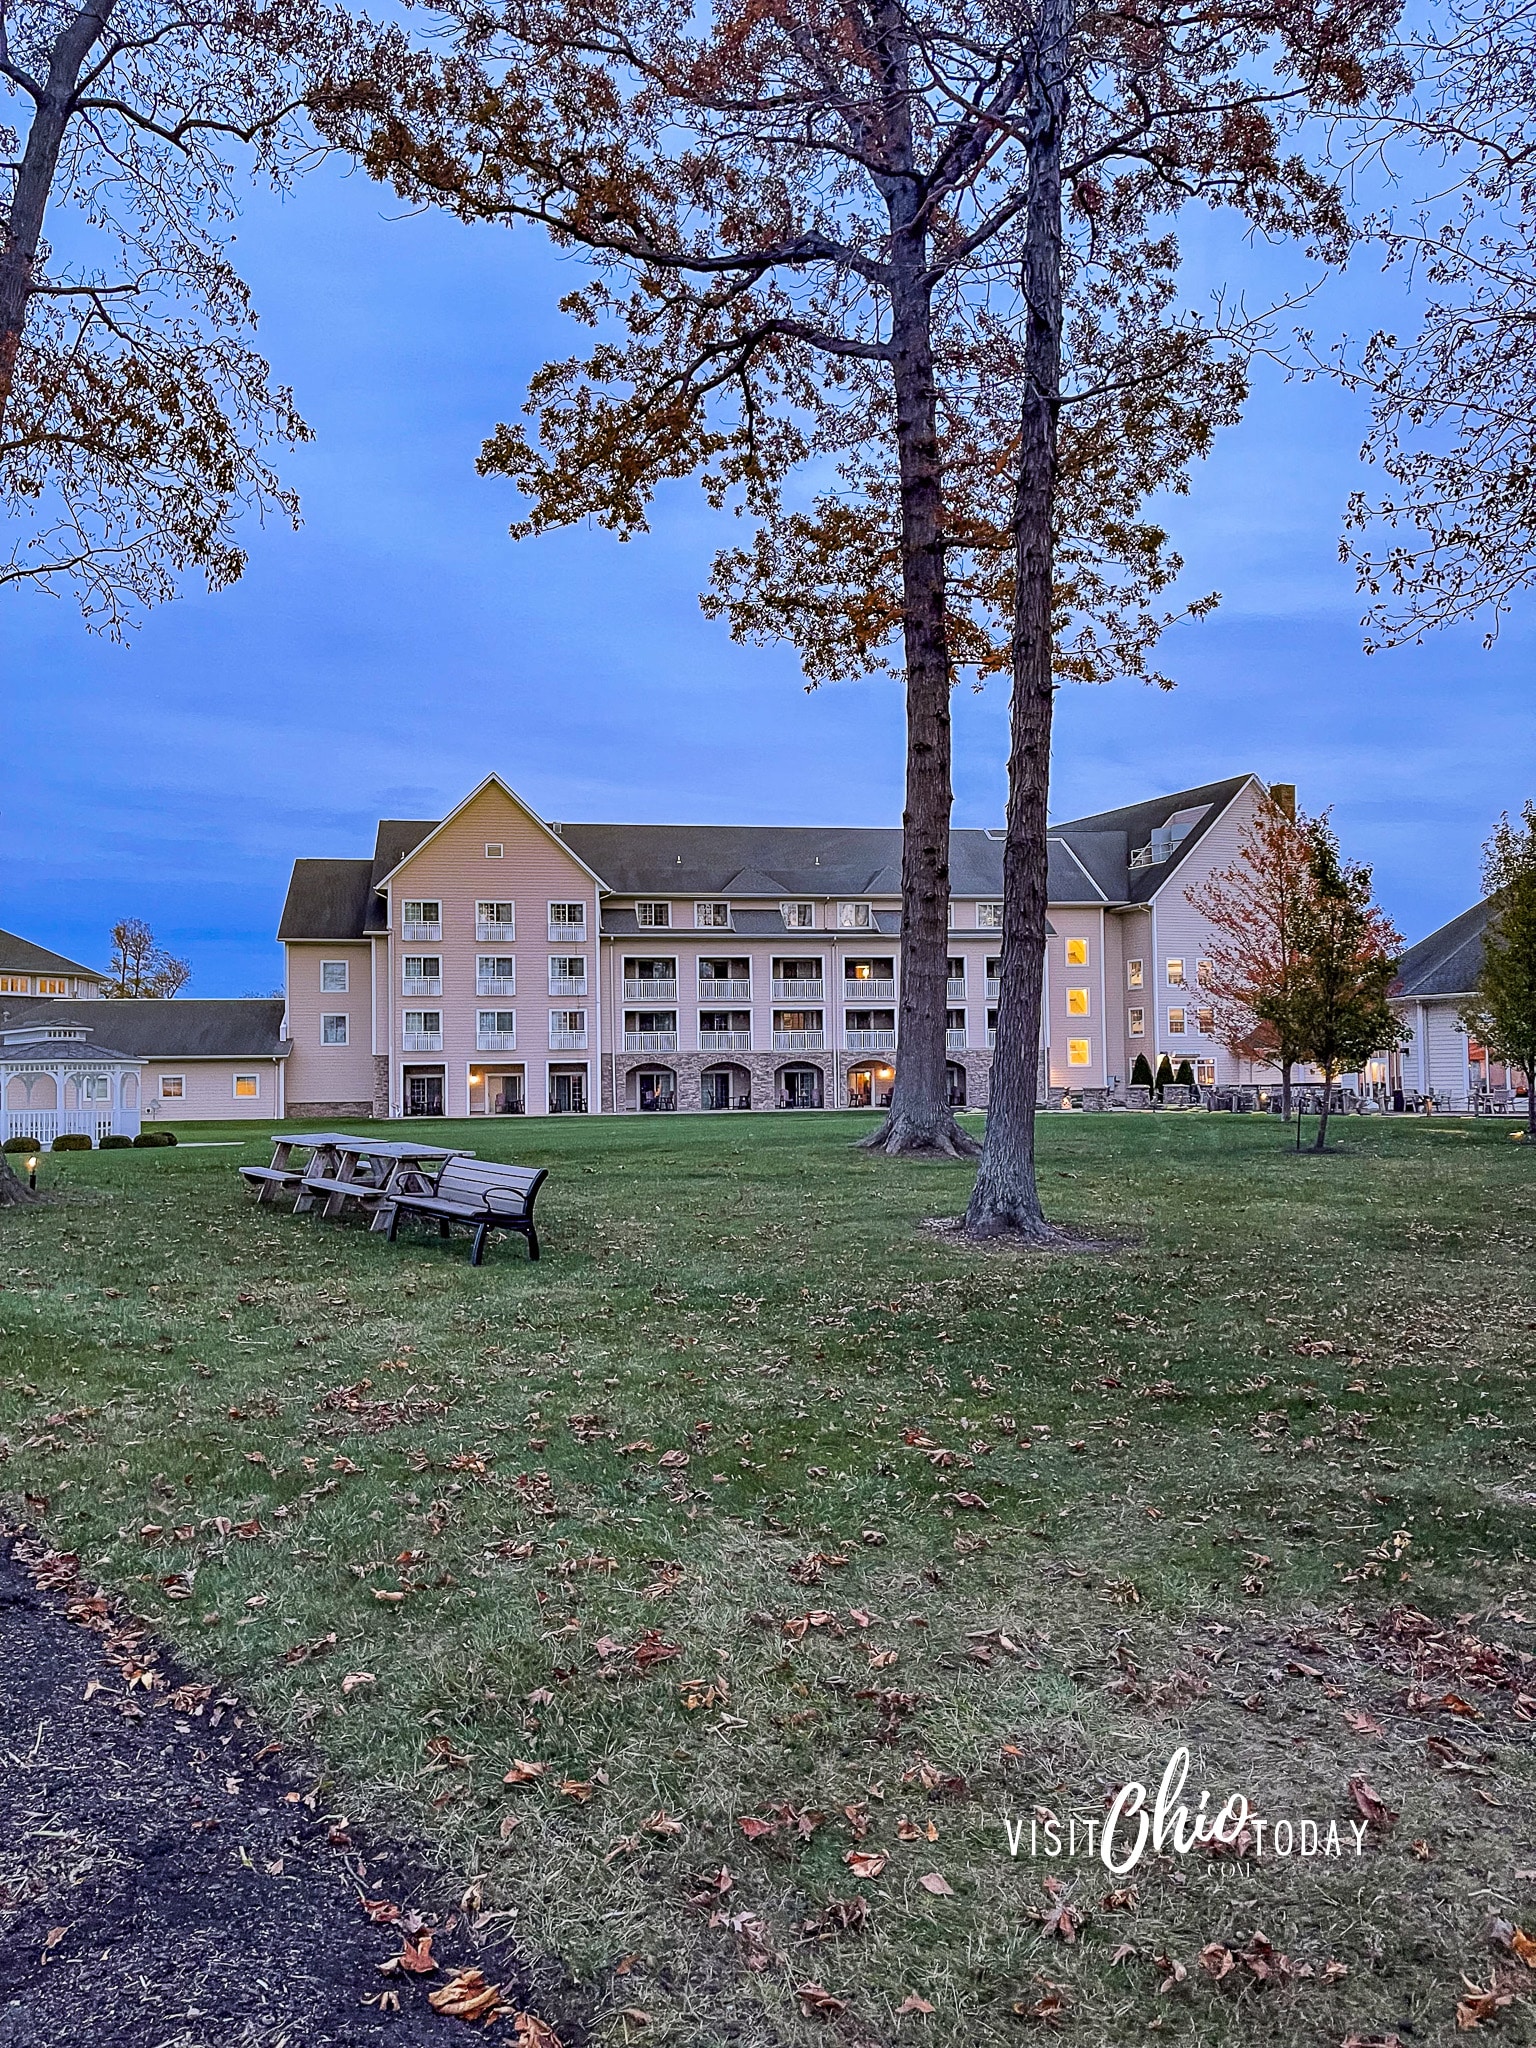 vertical photo of the Lodge at Geneva-on-the-Lake with a grassy area and trees in the foreground